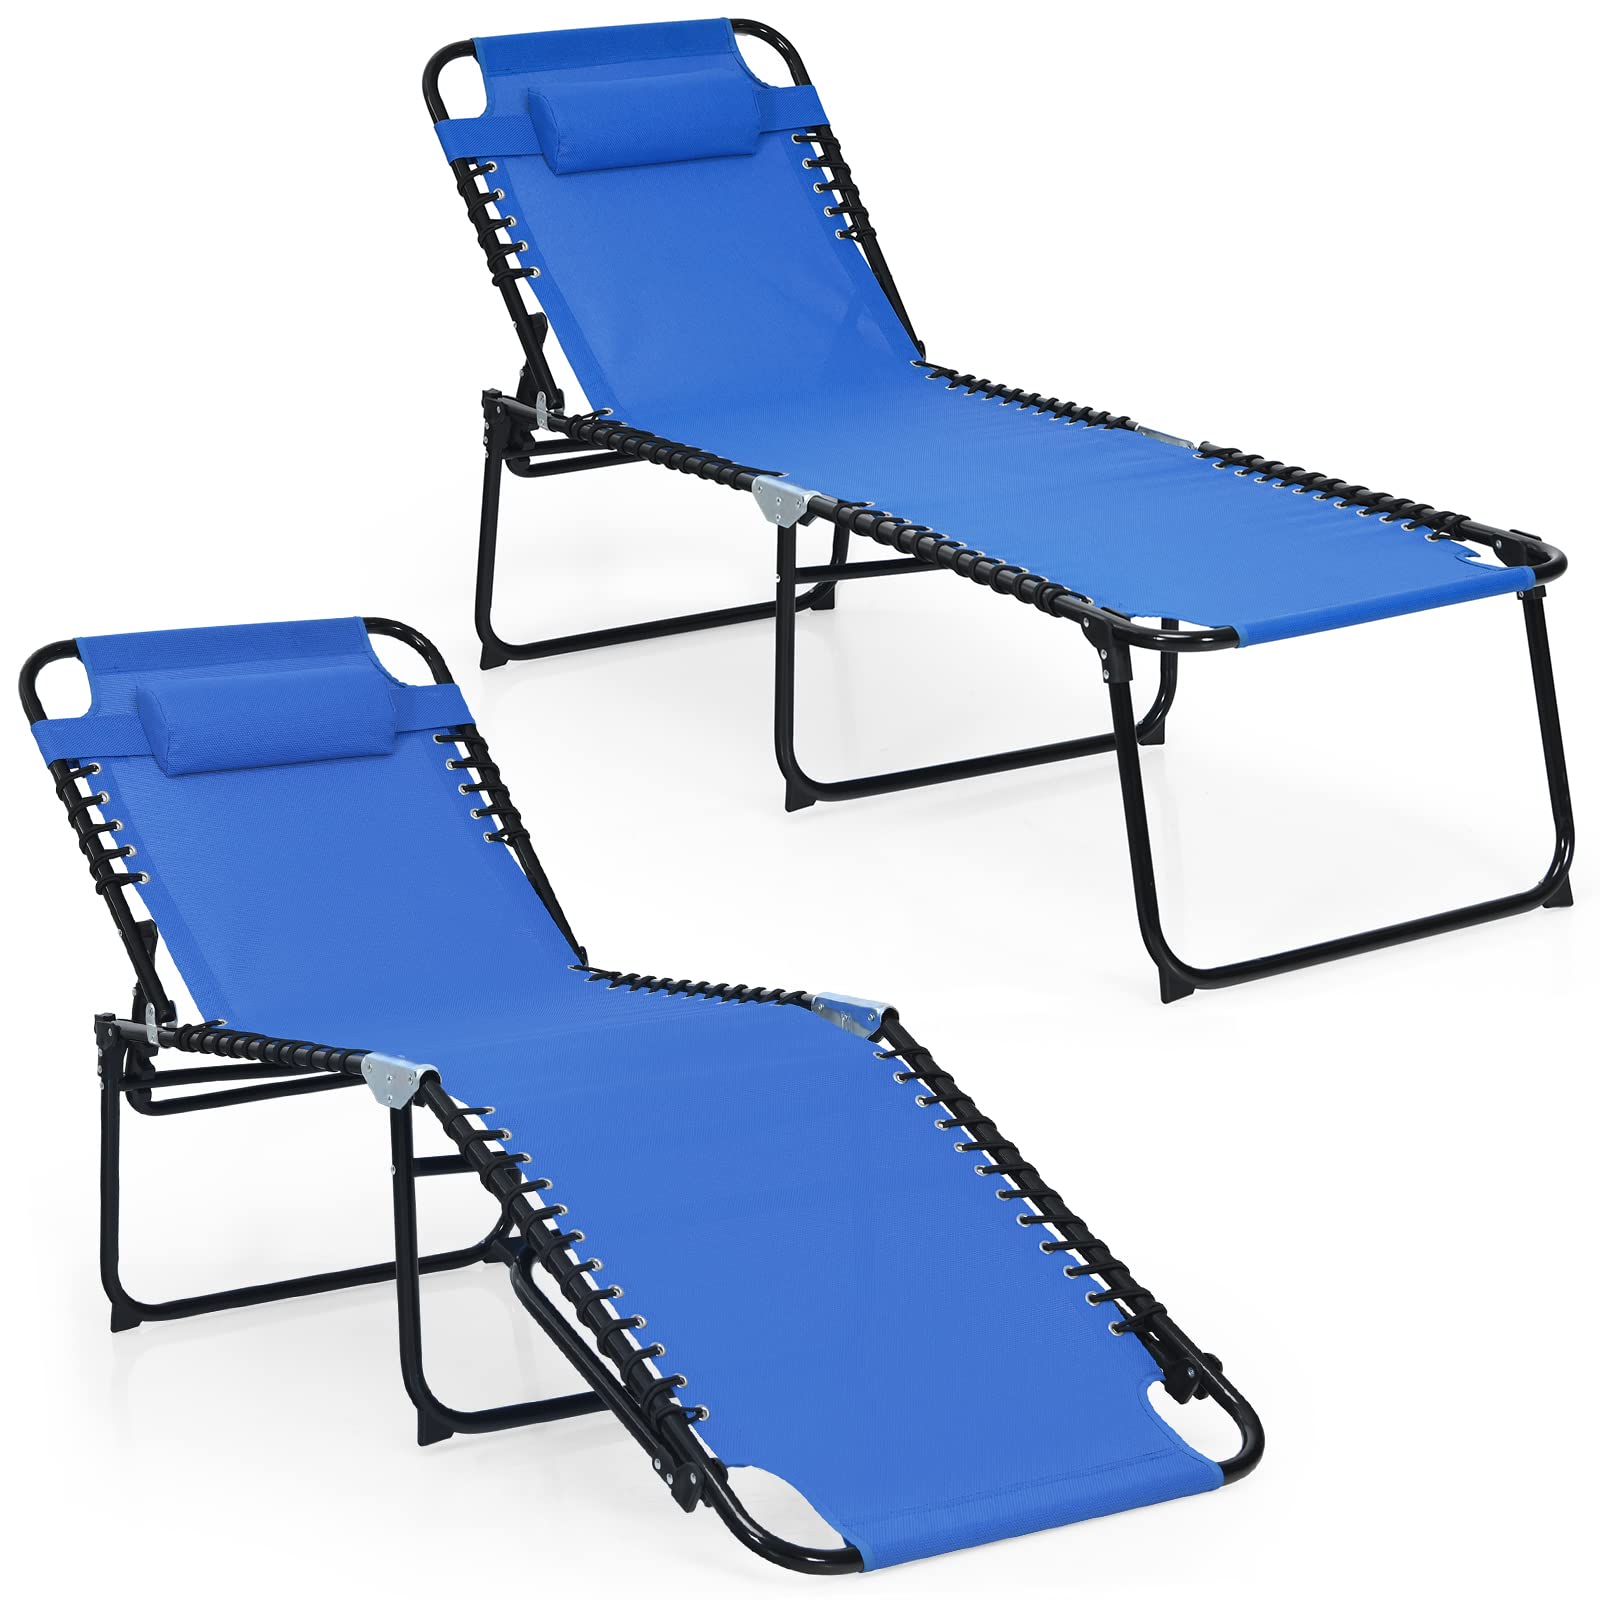 Giantex Patio Chaise Lounge Chair Foldable W/Adjustable Positions